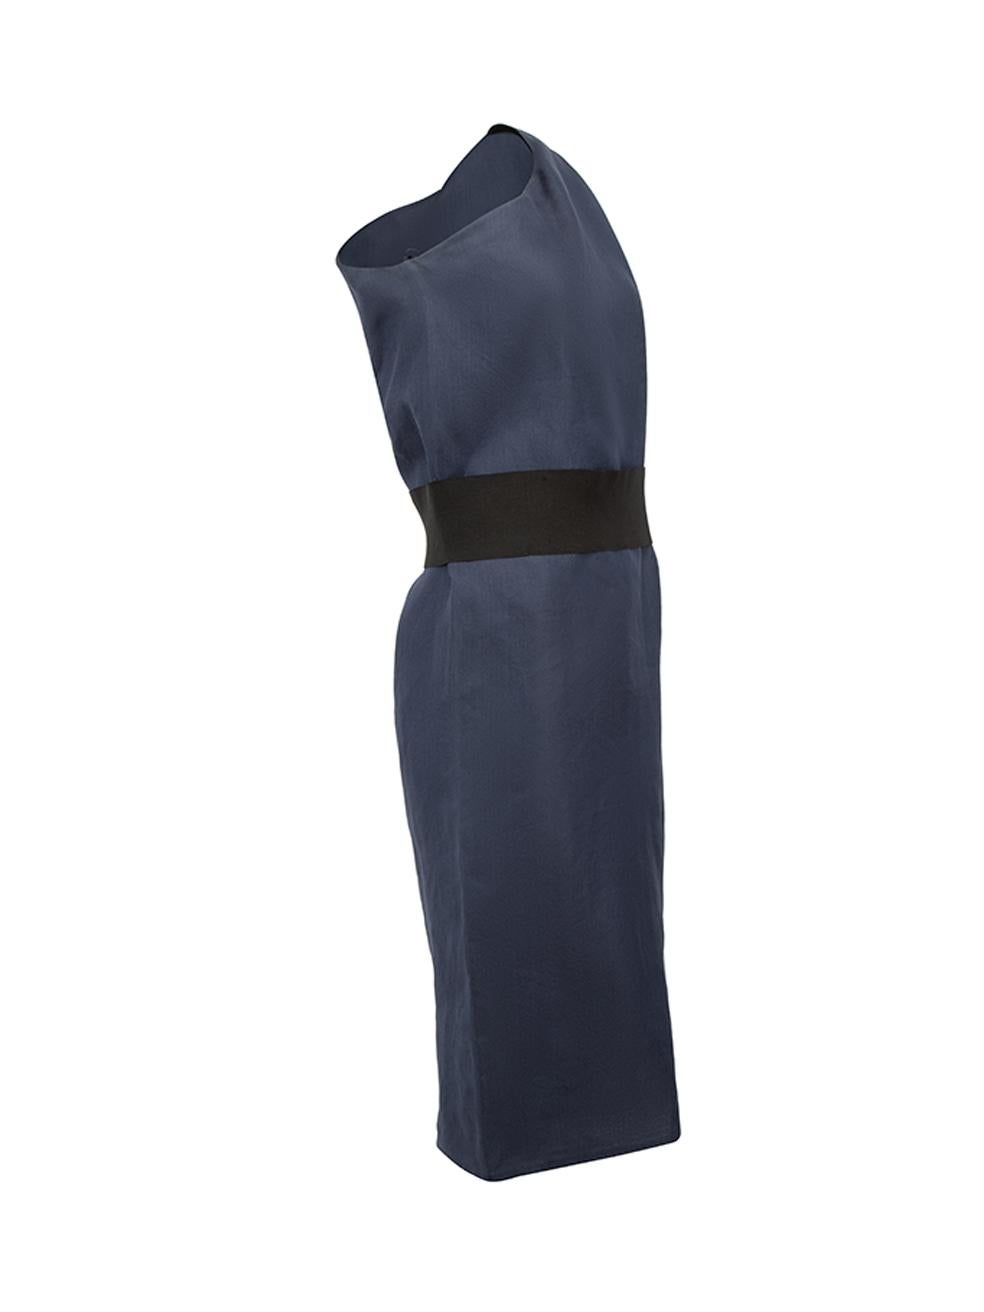 CONDITION is Very good. Hardly any visible wear to dress is evident on this used Lanvin designer resale item. 



Details


Navy

Silk

Mini dress

One shoulder

Side double zipped closure

Elastic waistband





Made in France



Composition

100%